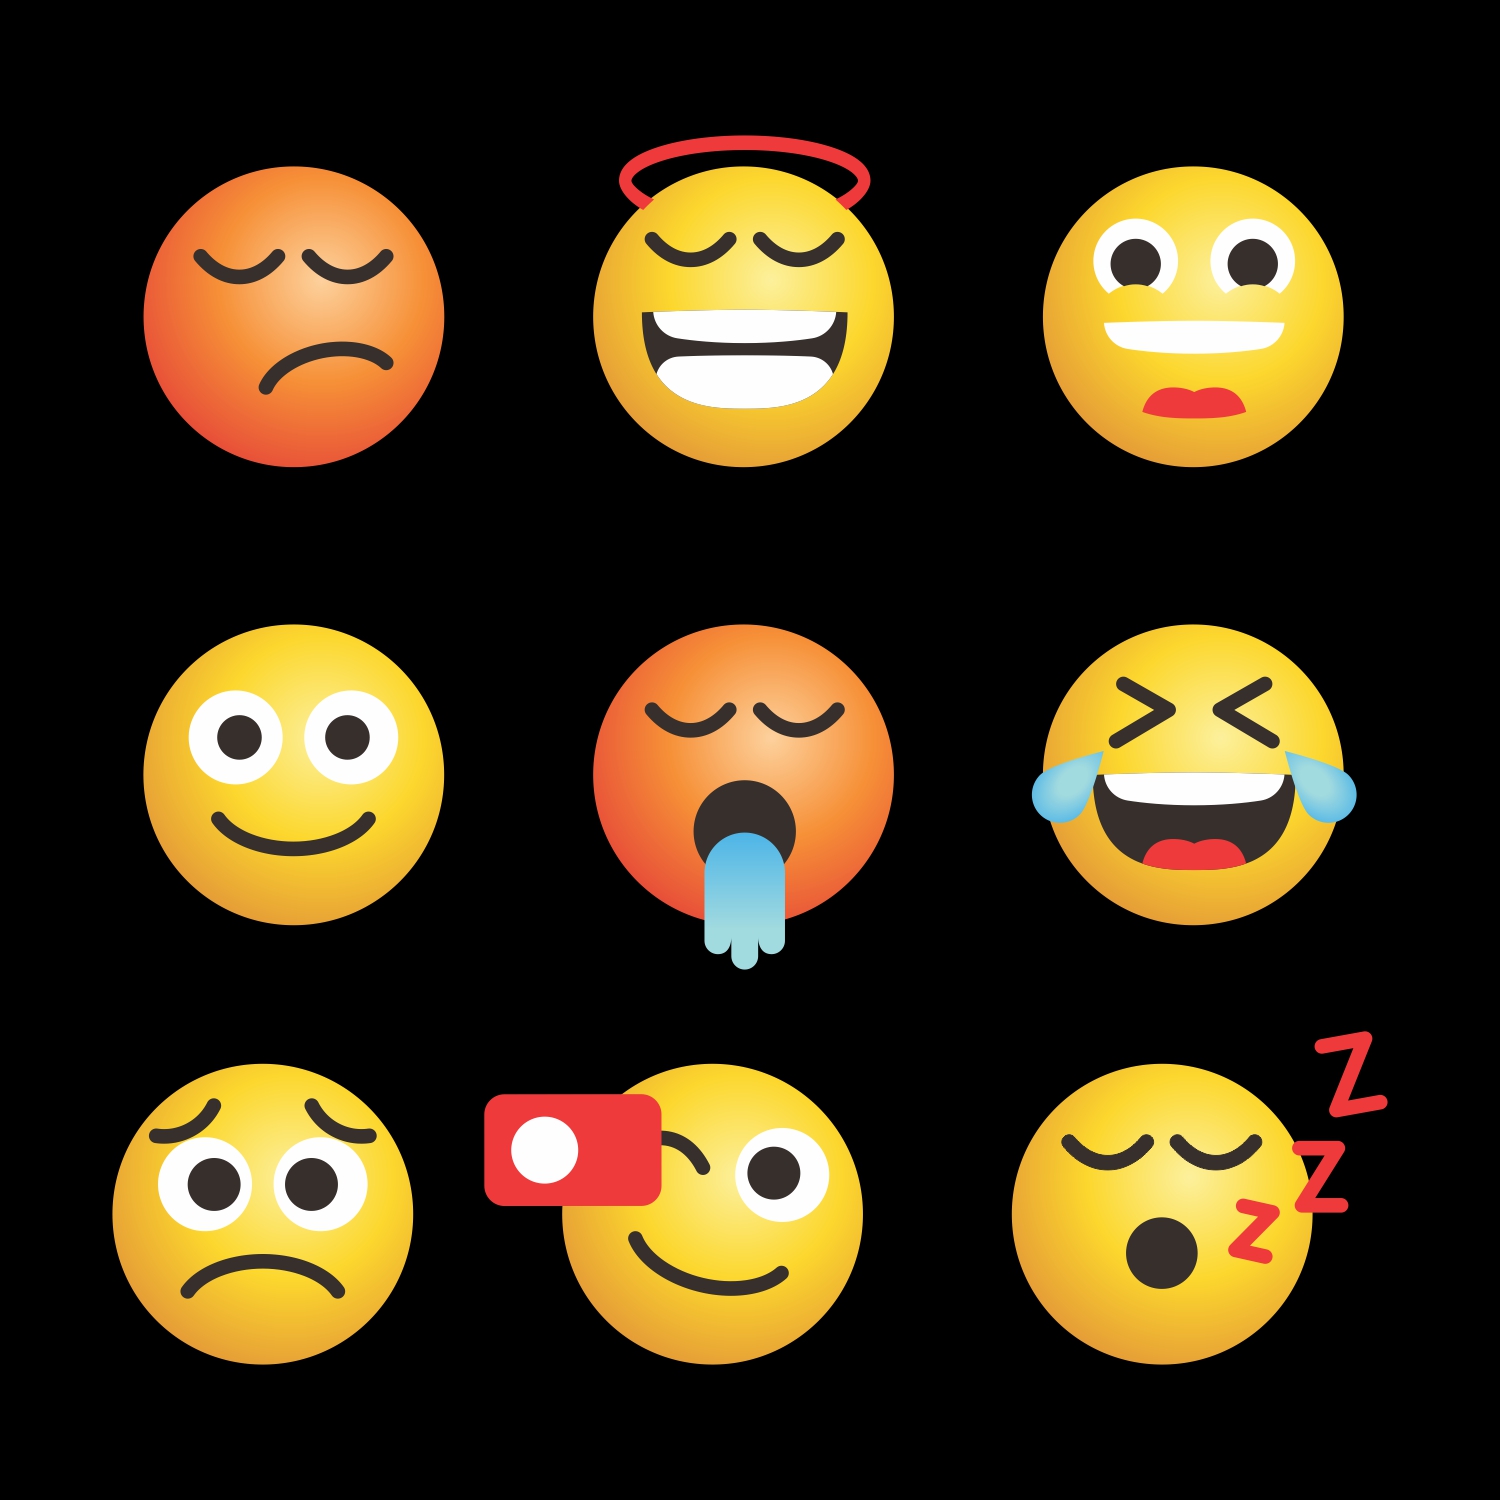 free vector cute emoticons faces feeling vector set for social media CDR file download for free